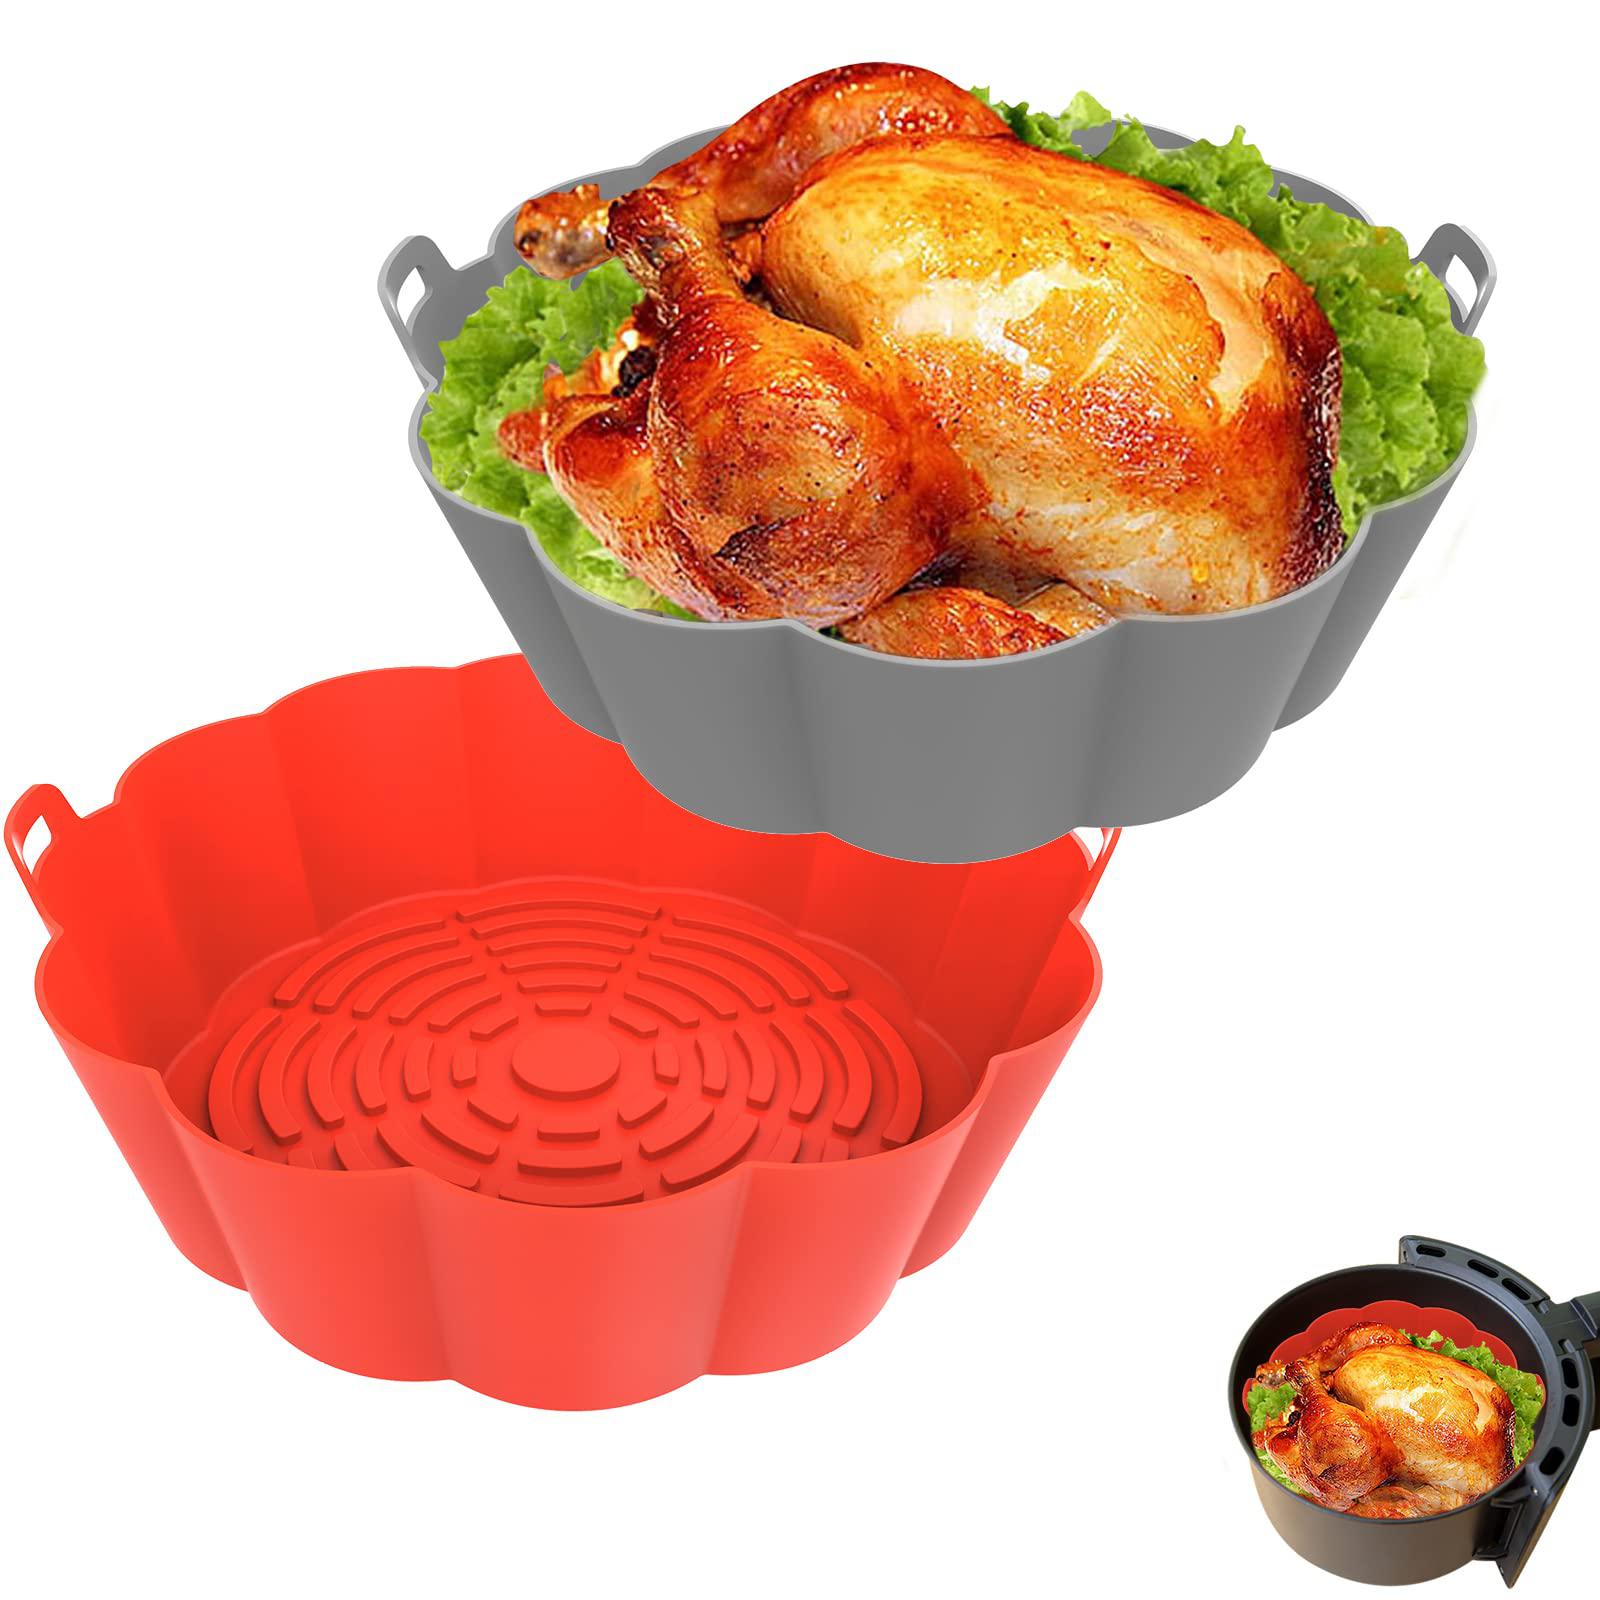 7UPAWTECH air fryer liners, reusable heat-resistant silicone